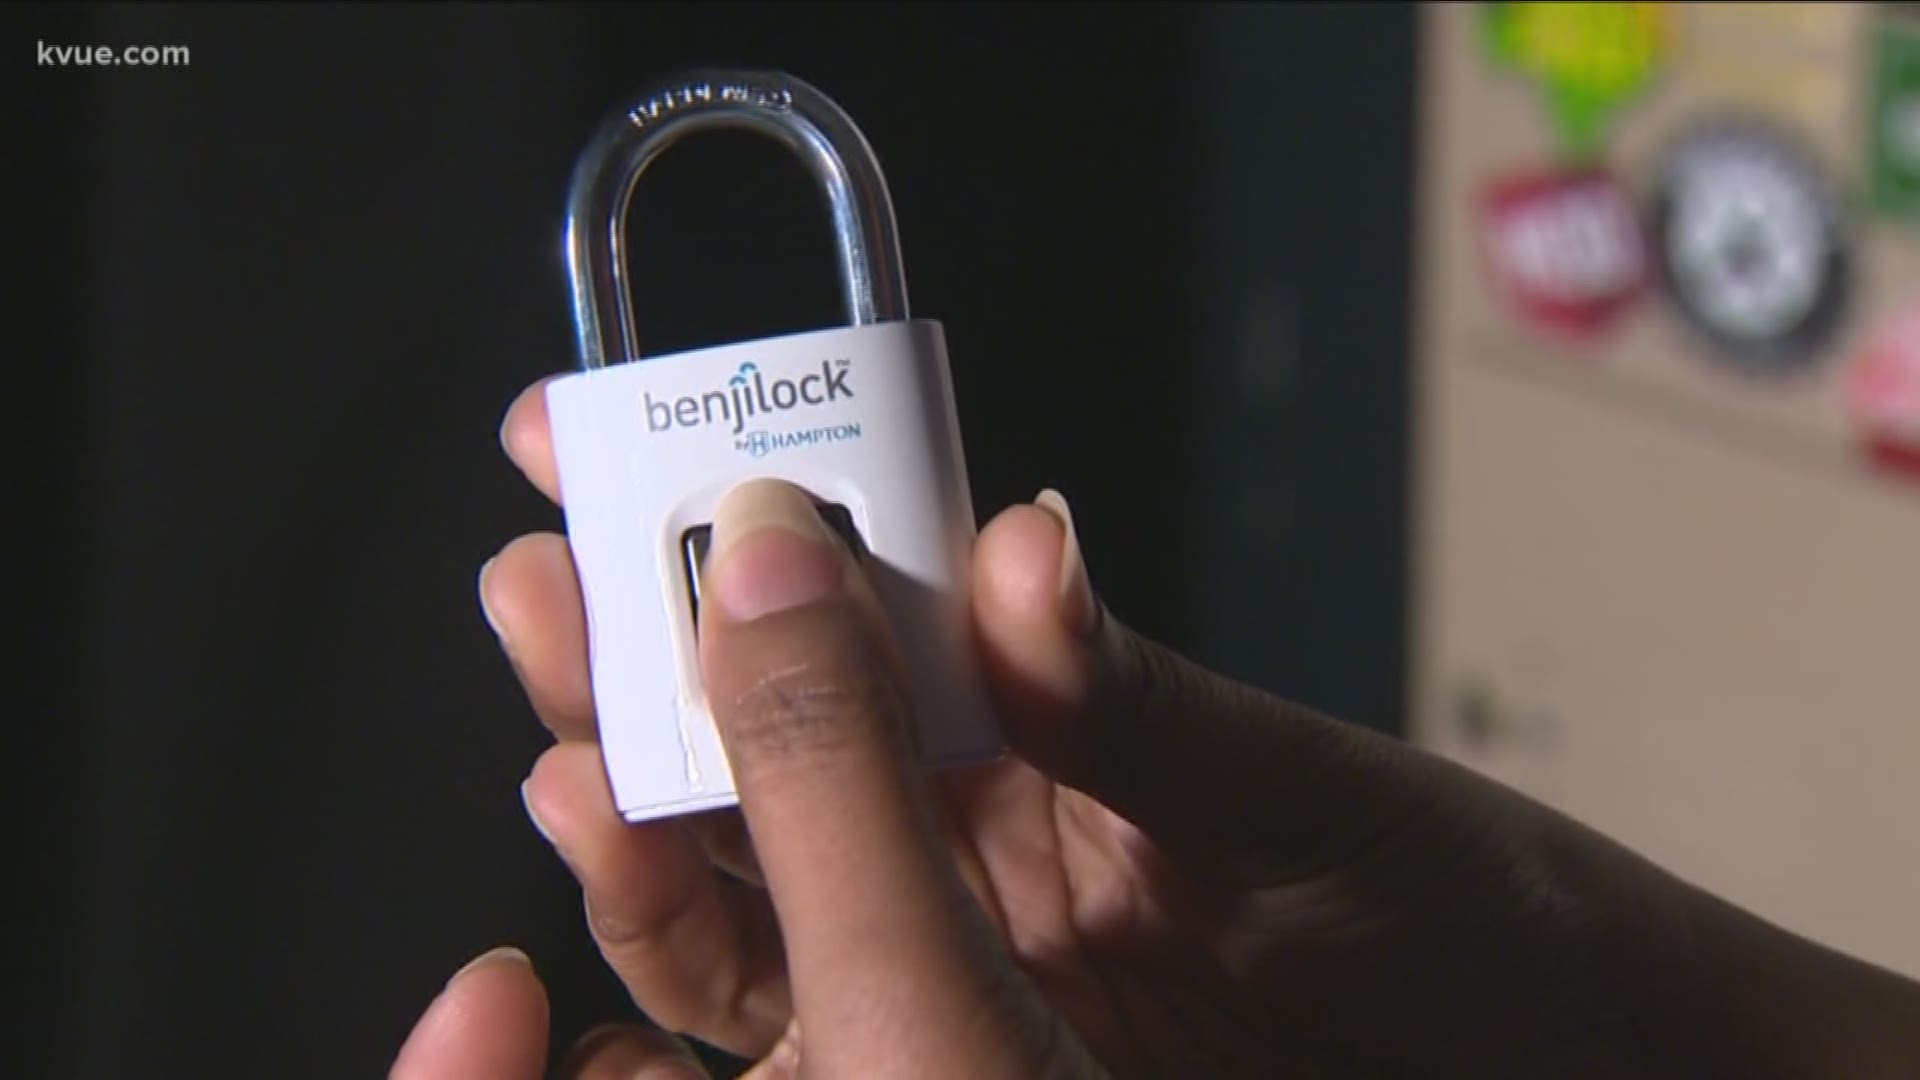 You open your phone with your fingerprint, so why not a padlock?